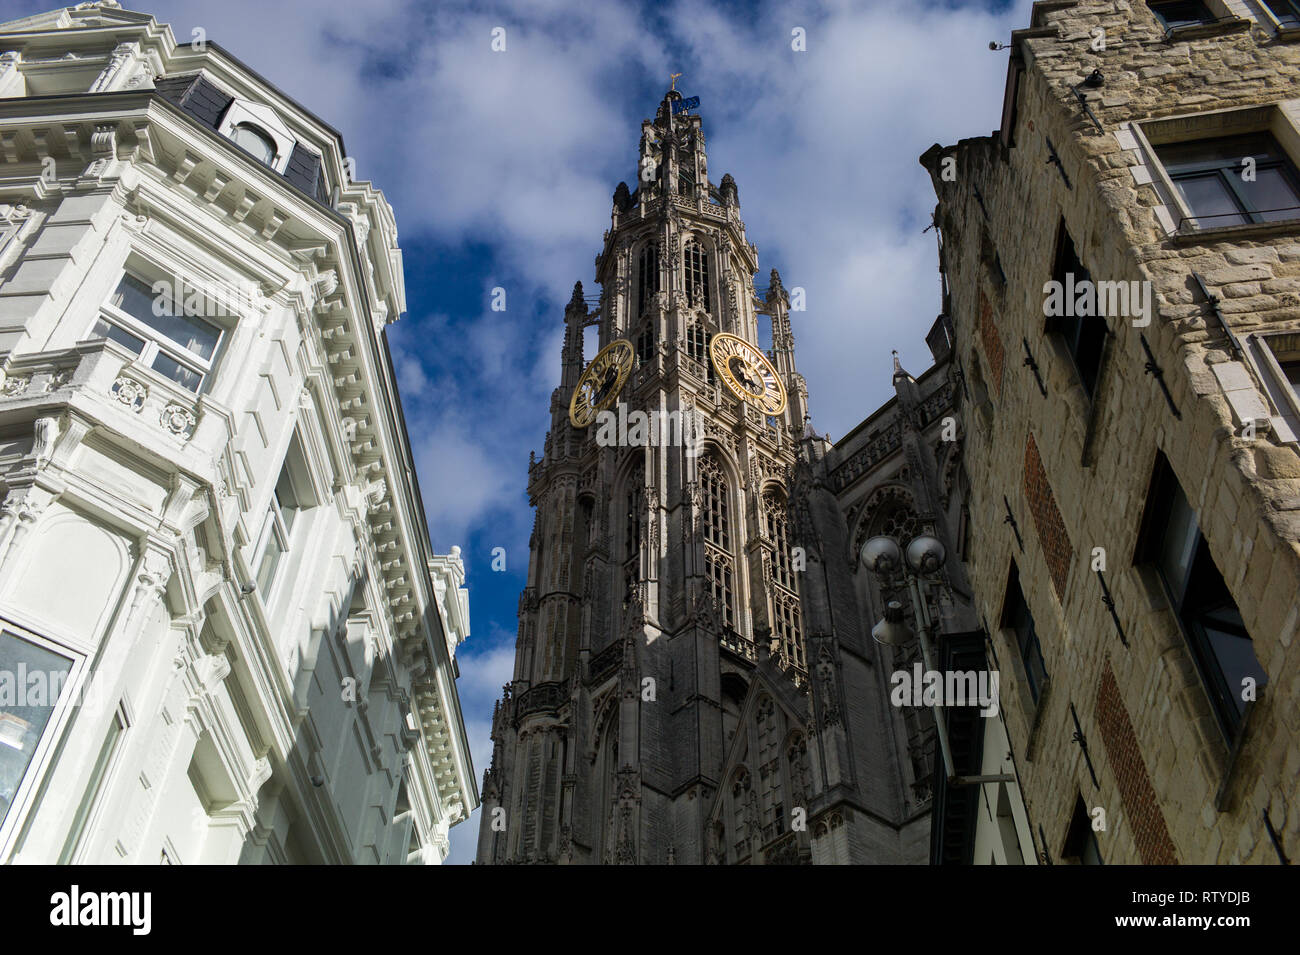 View of the tower of the Cathedral of Our Lady, Antwerp, Belgium Stock Photo